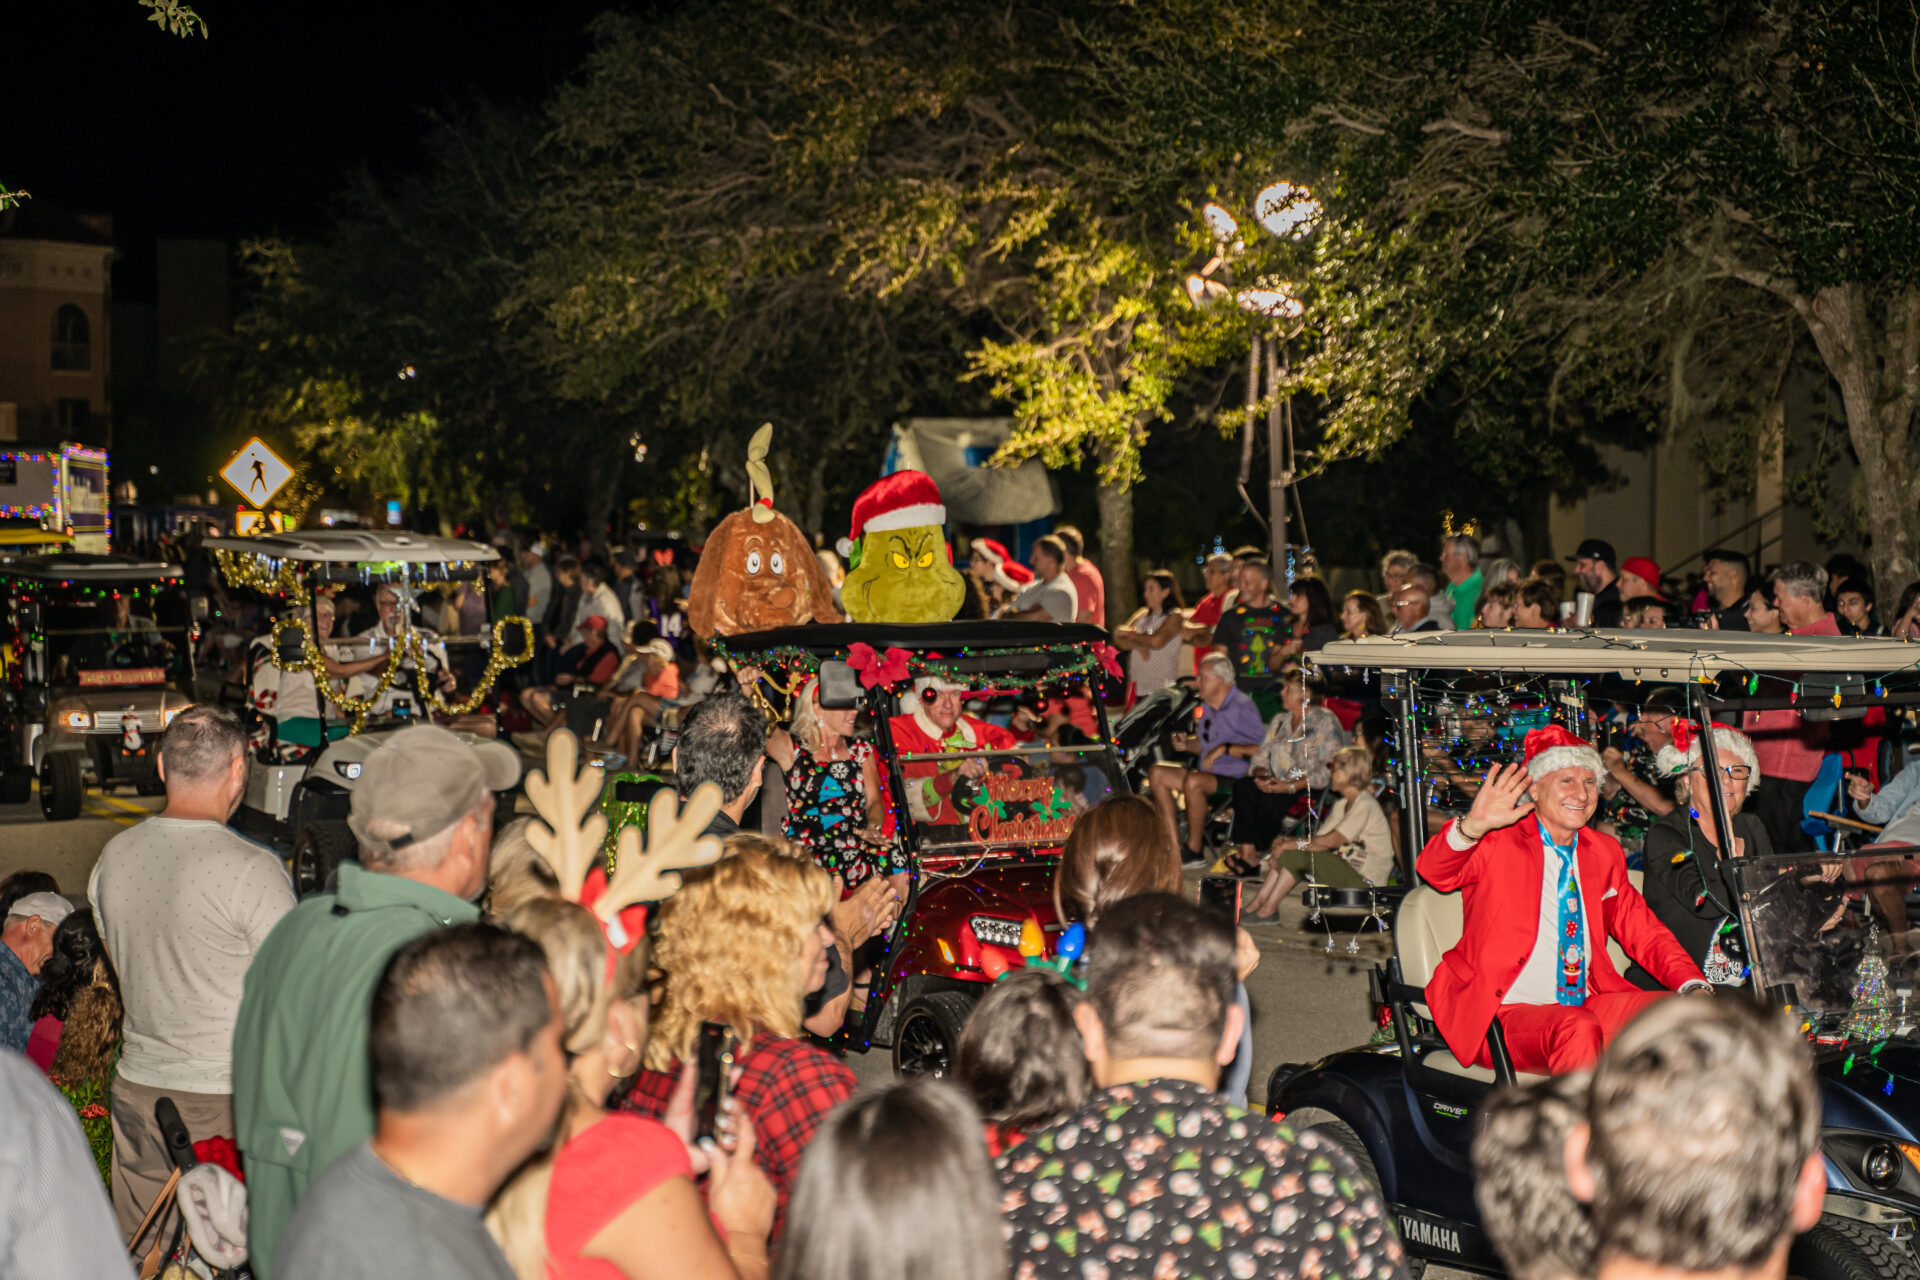 2022 Hometown Christmas Parade in the Ave Maria Town Center